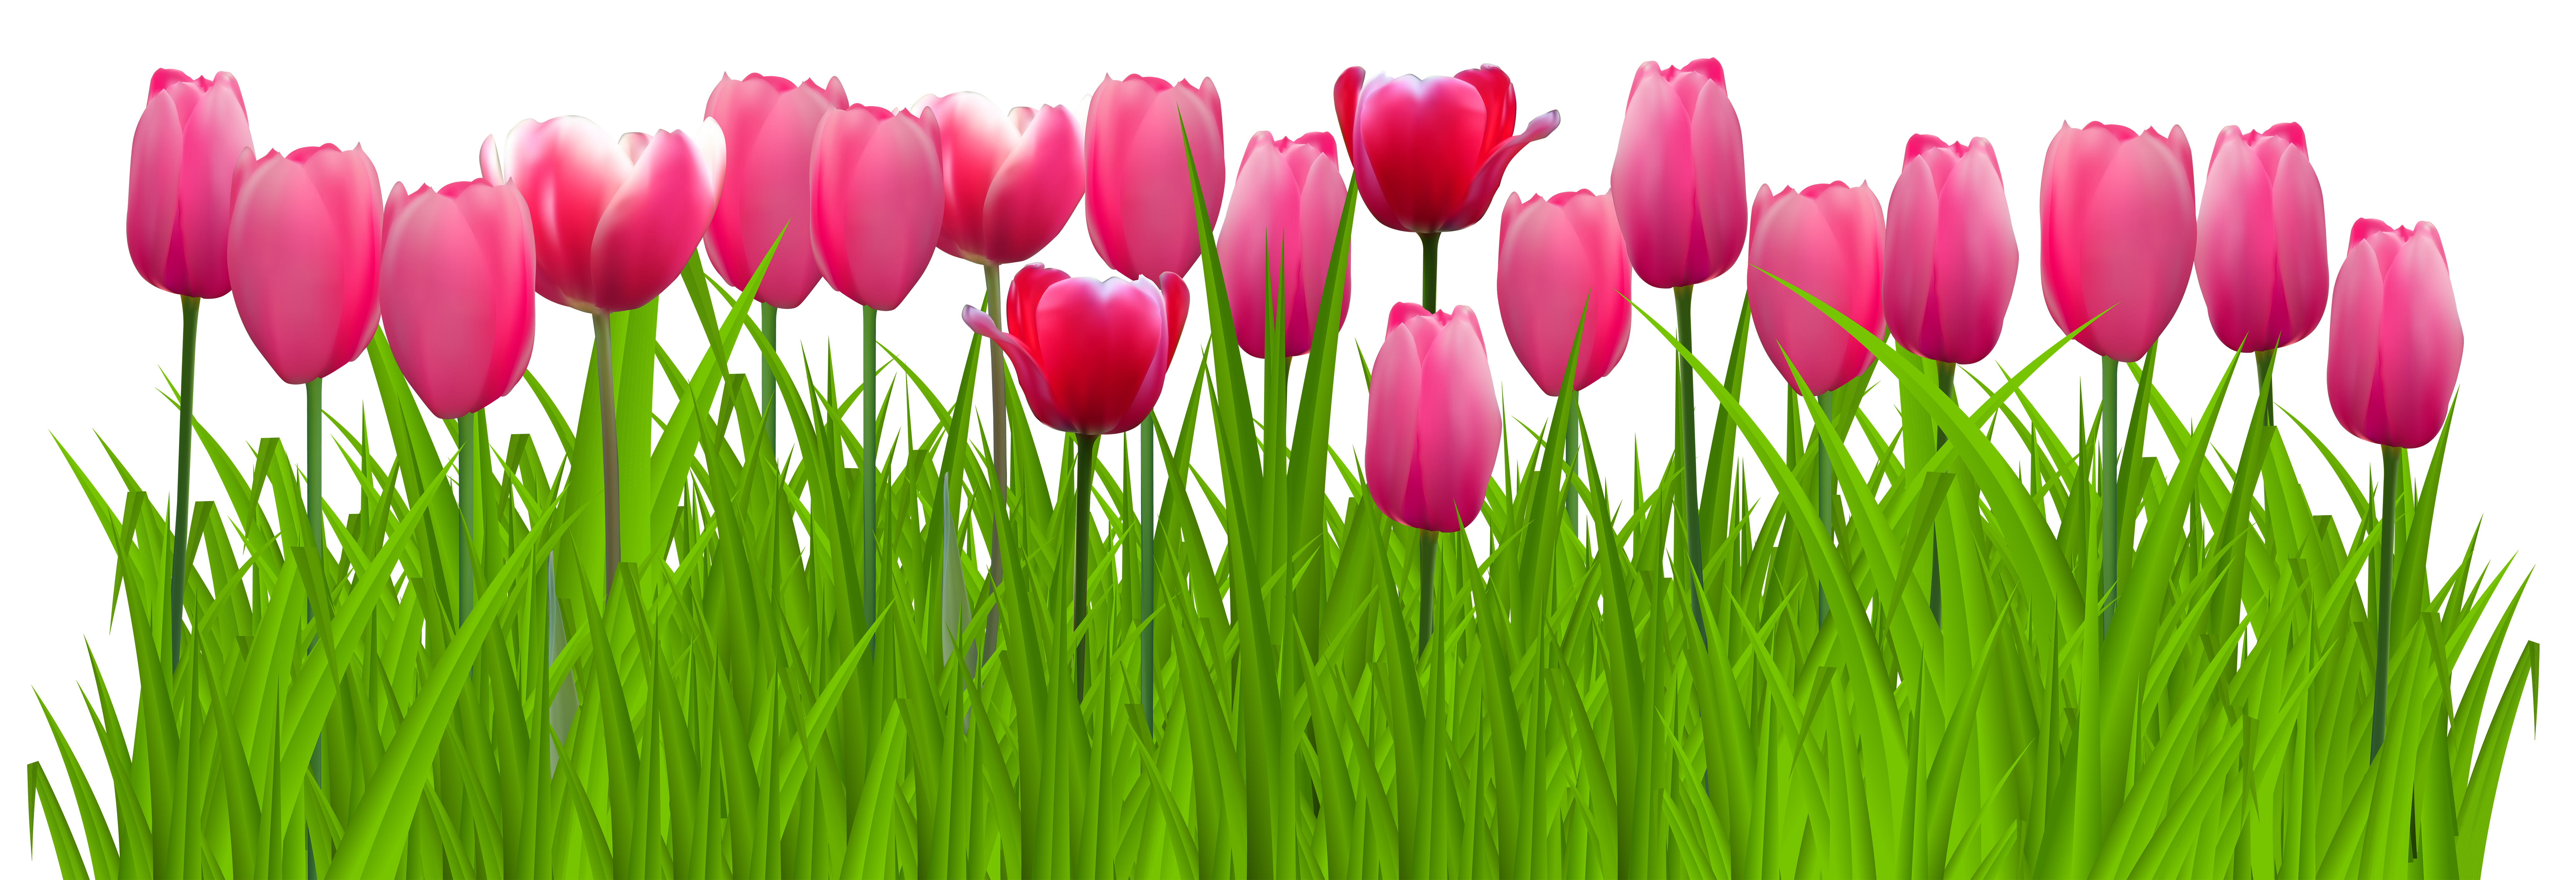 Tulips clipart 20 free Cliparts | Download images on ...